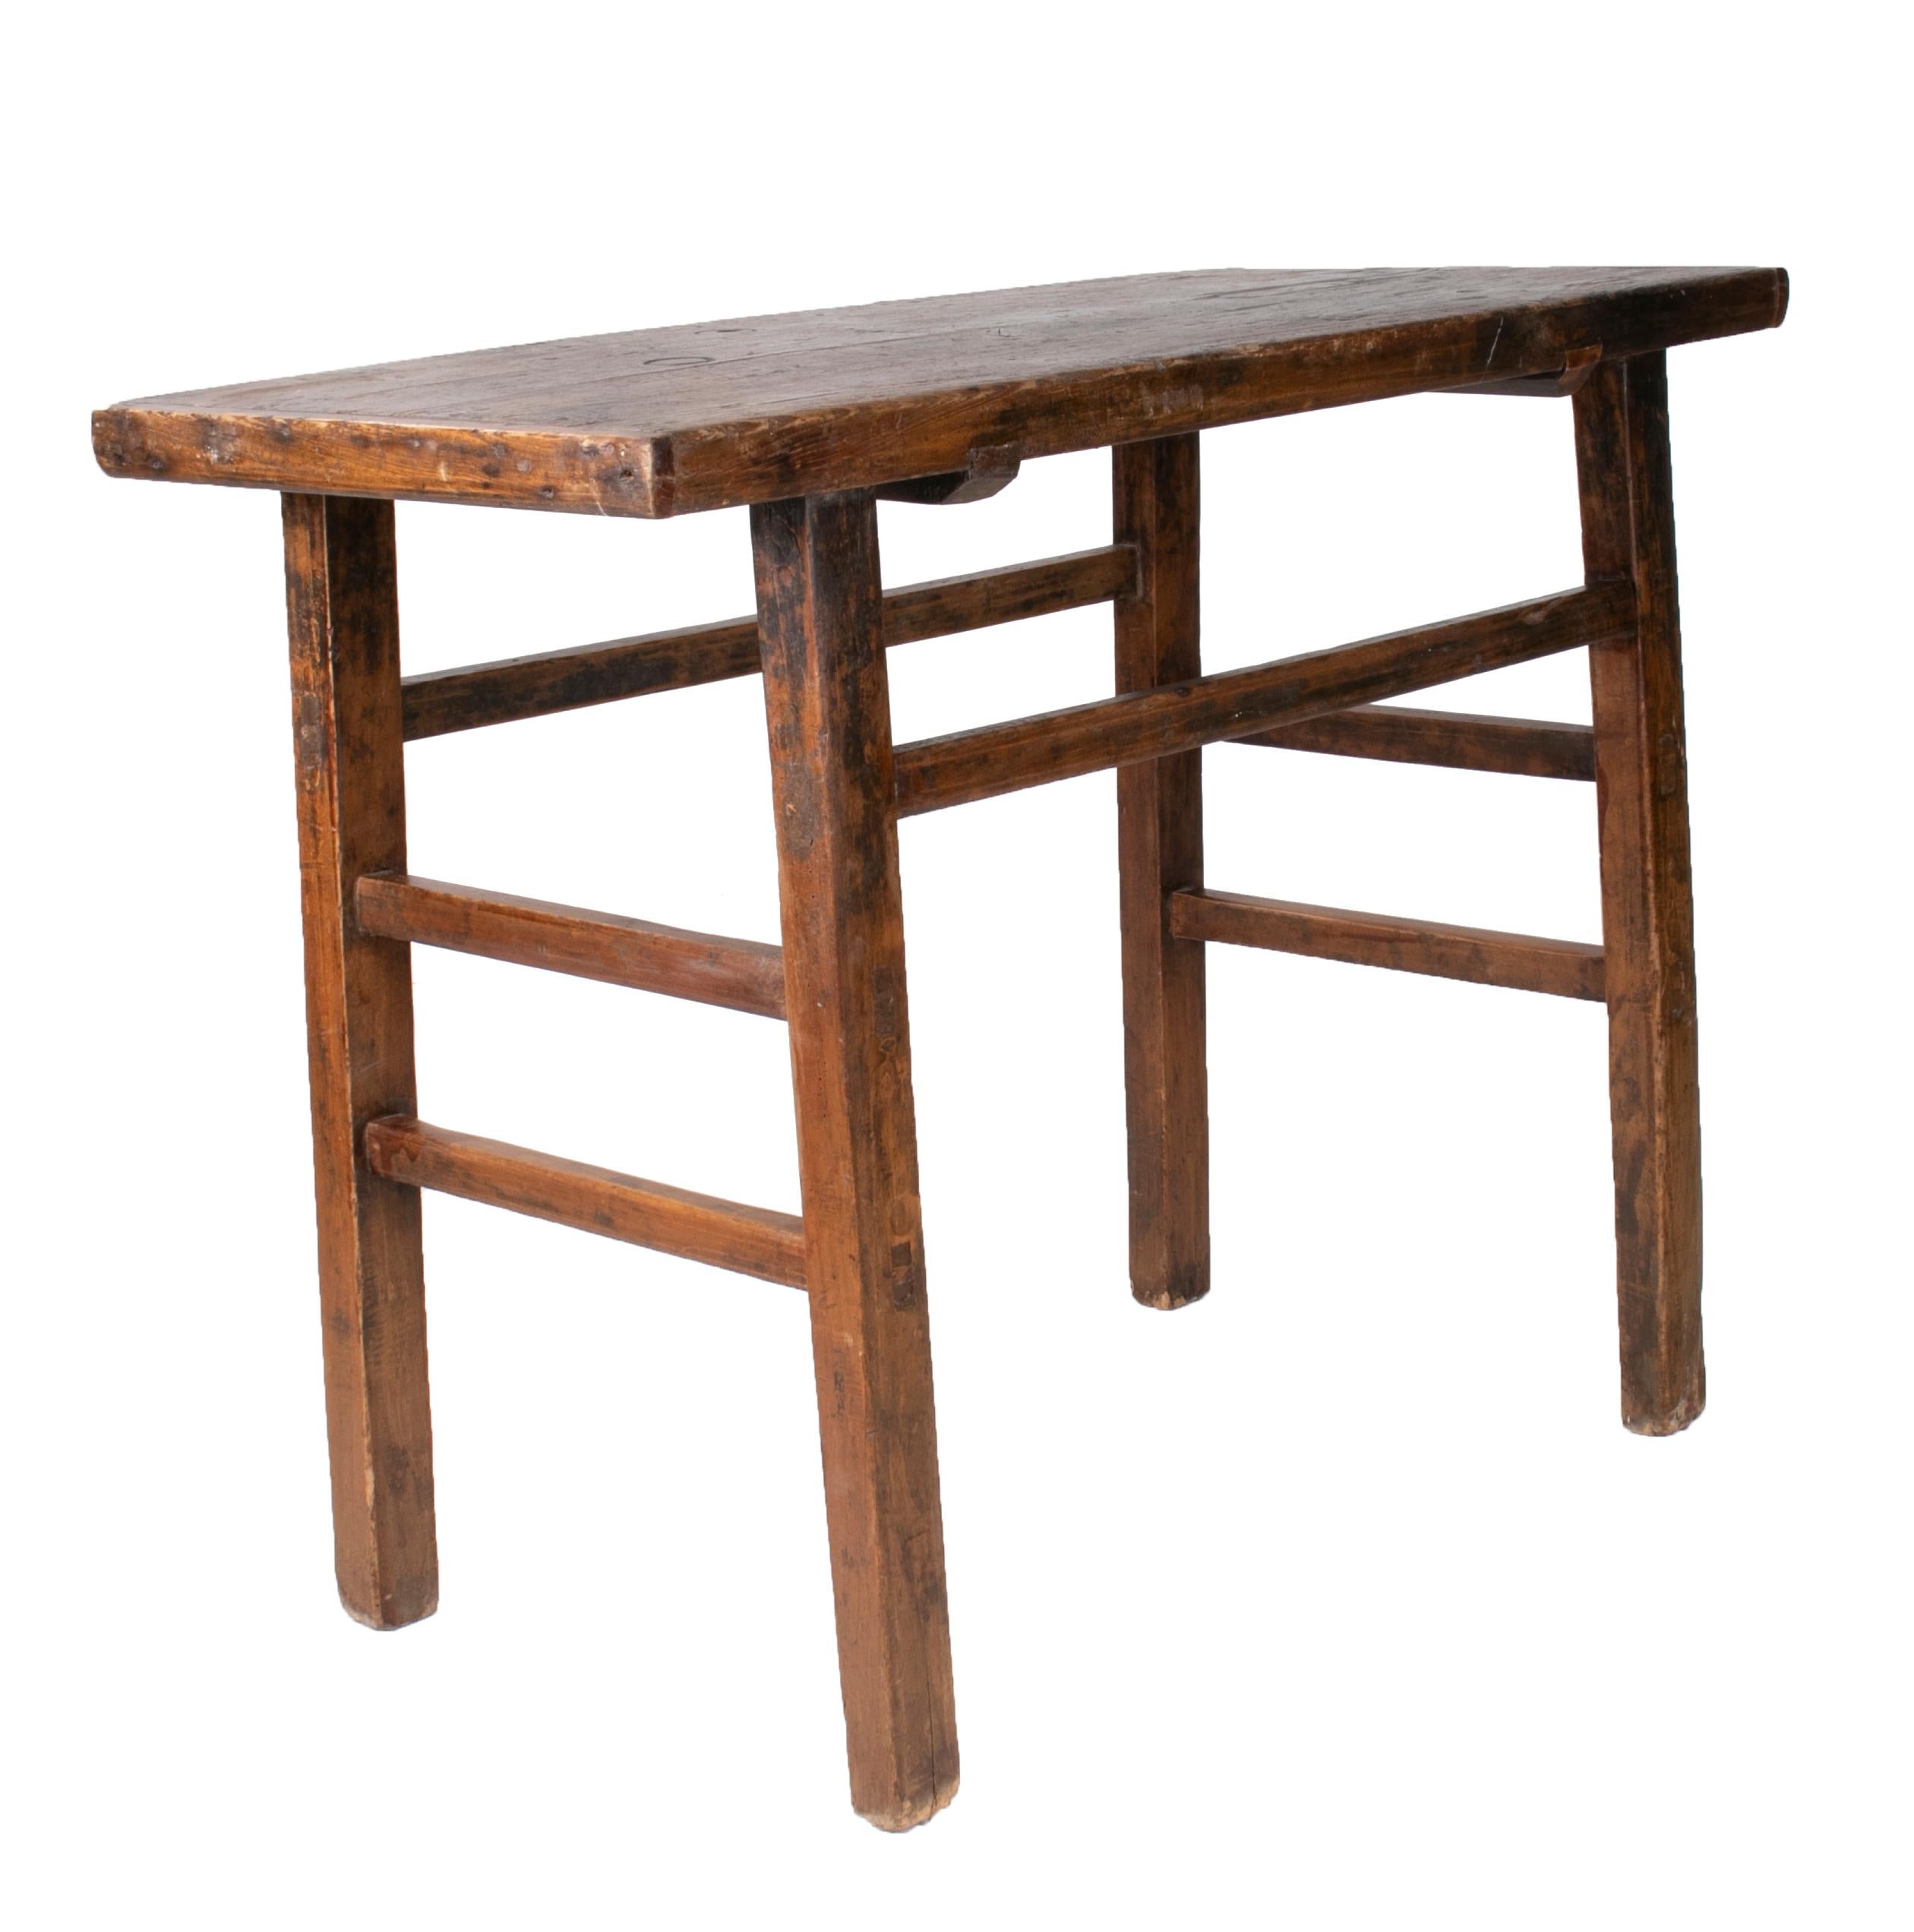 20th Century 1920s European Natural Wood Finish Console Table